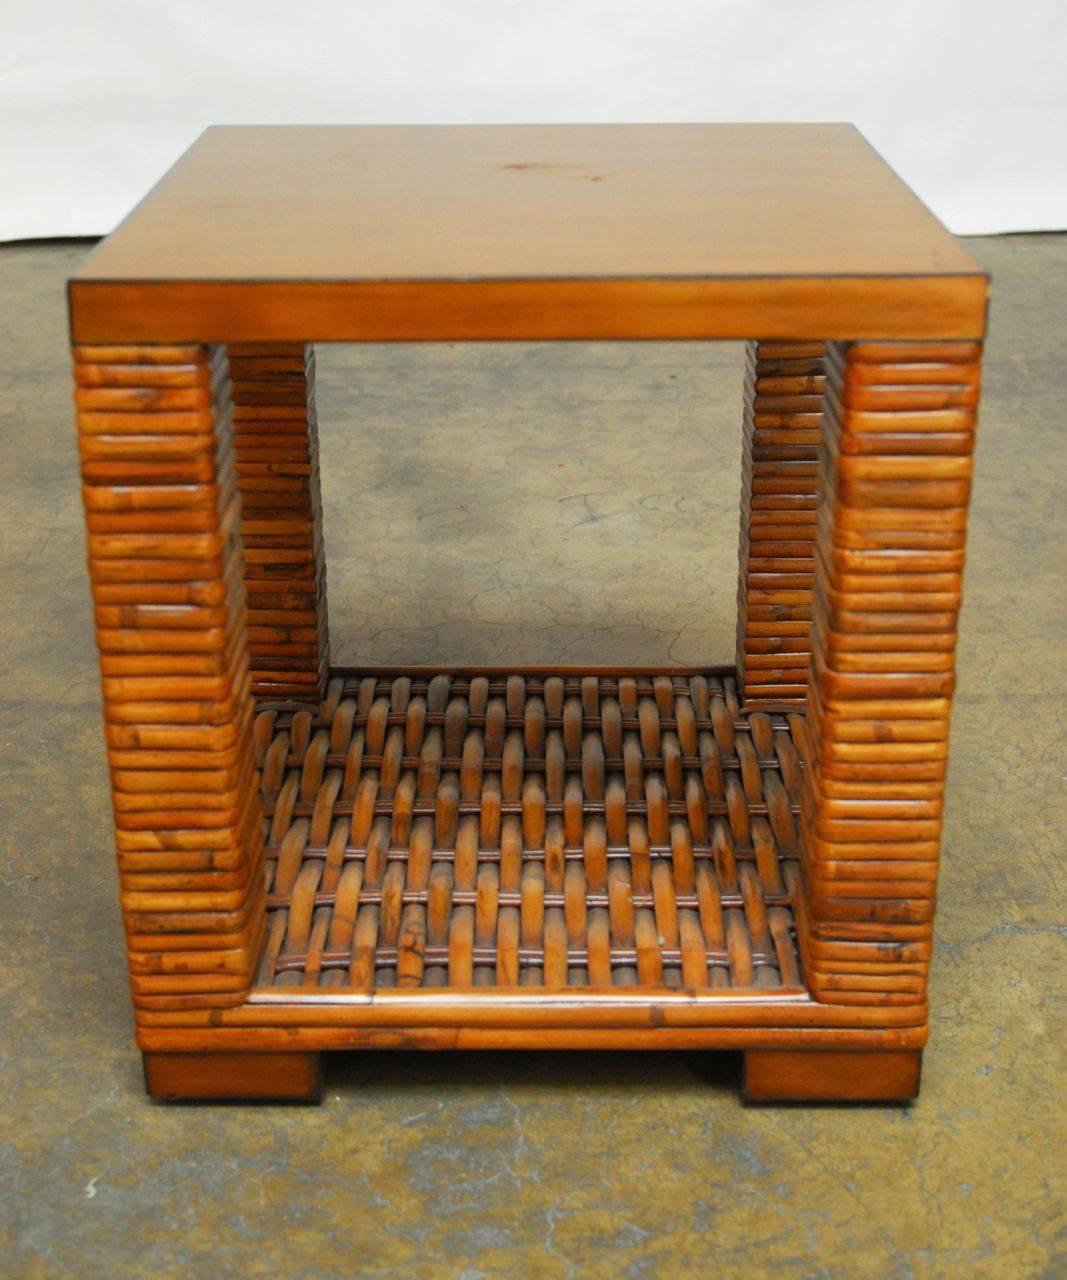 Stylish bamboo end table by Palecek of San Francisco, CA featuring a two-tier shelf with square legs wrapped in shaped bamboo, and a woven bamboo lower shelf. Topped by a walnut slab with a warm finish. Supported by square walnut feet.
